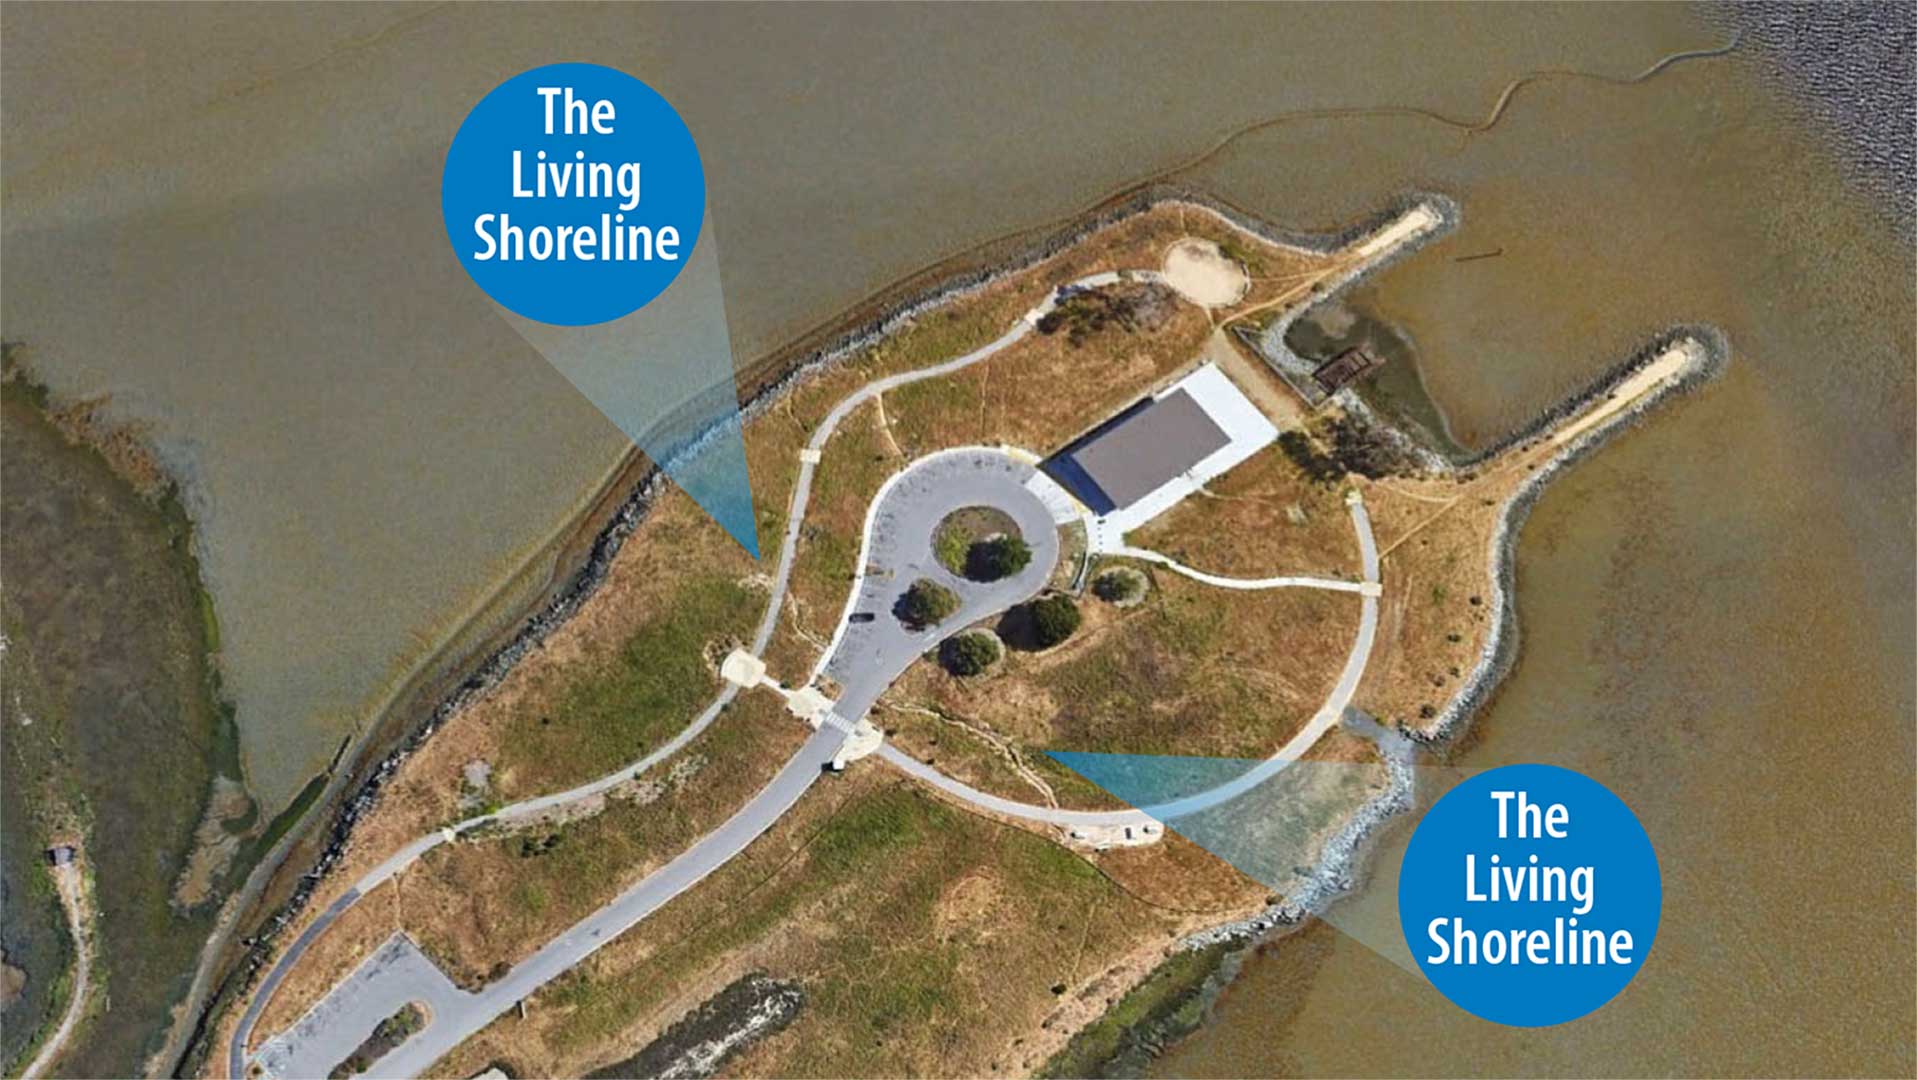 Living Shoreline installation is visible from space as seen in this  Satellite Image